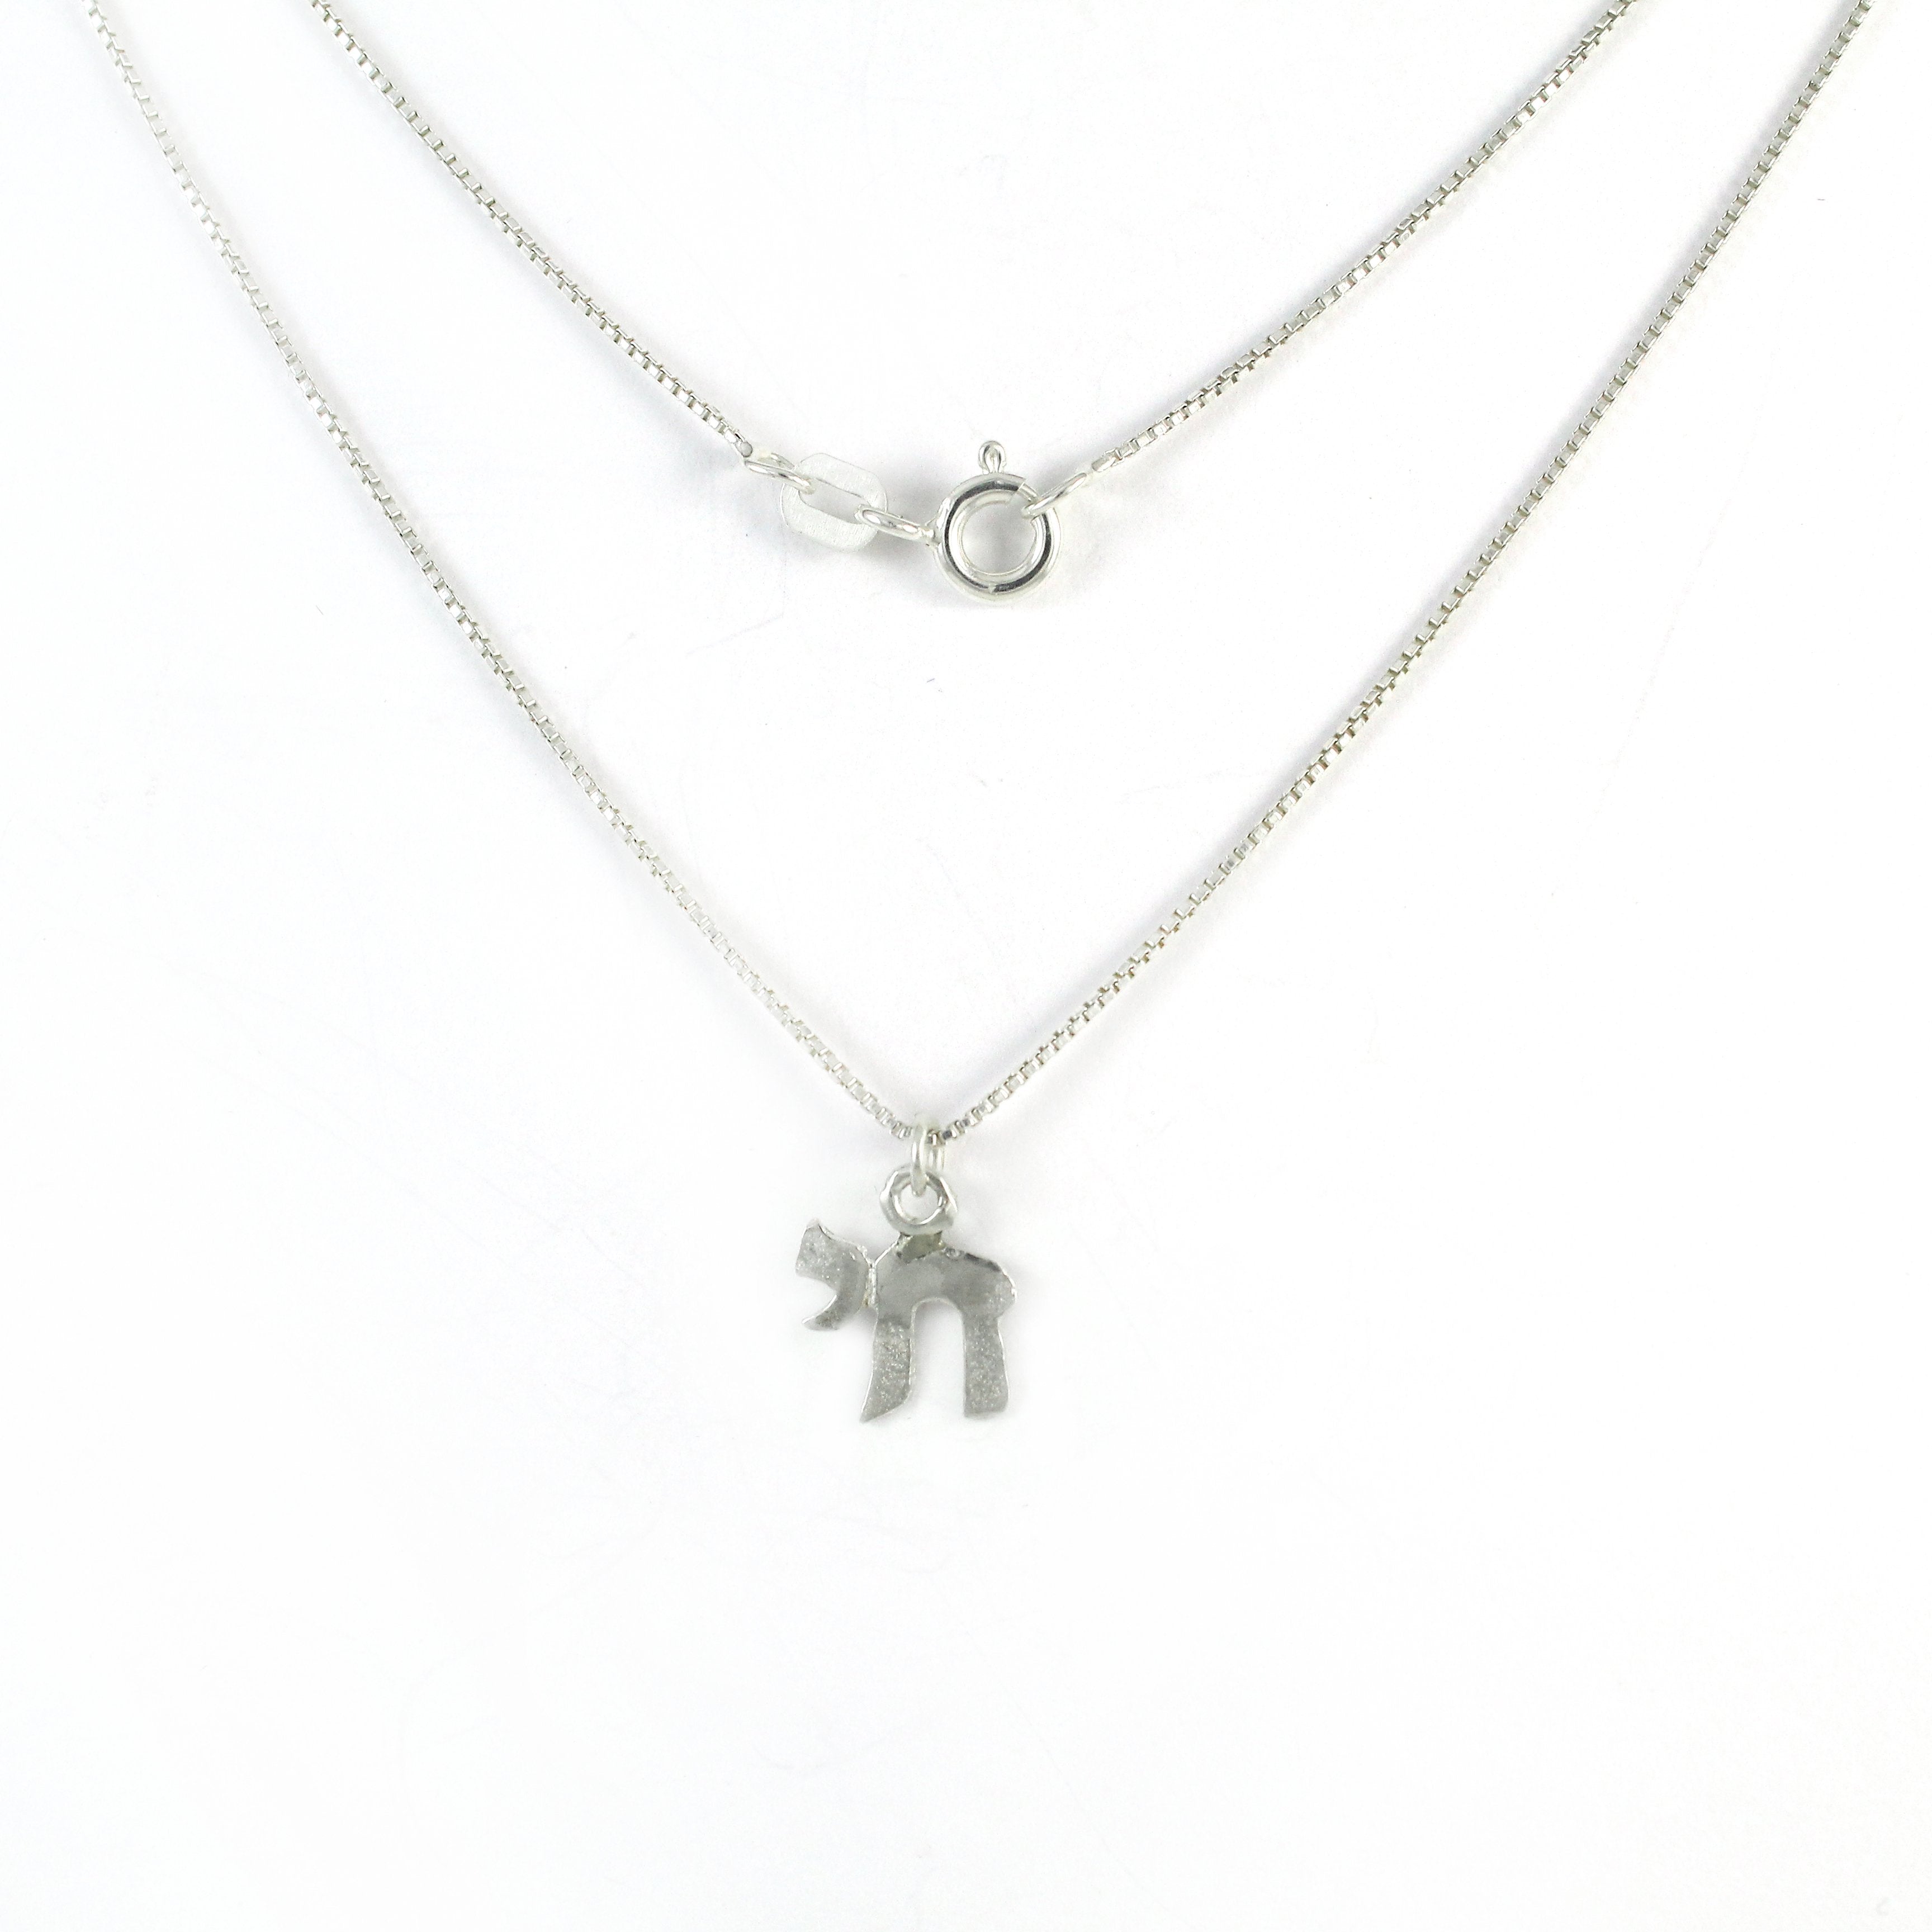 Small Chai Silver Necklace - Shulamit Kanter